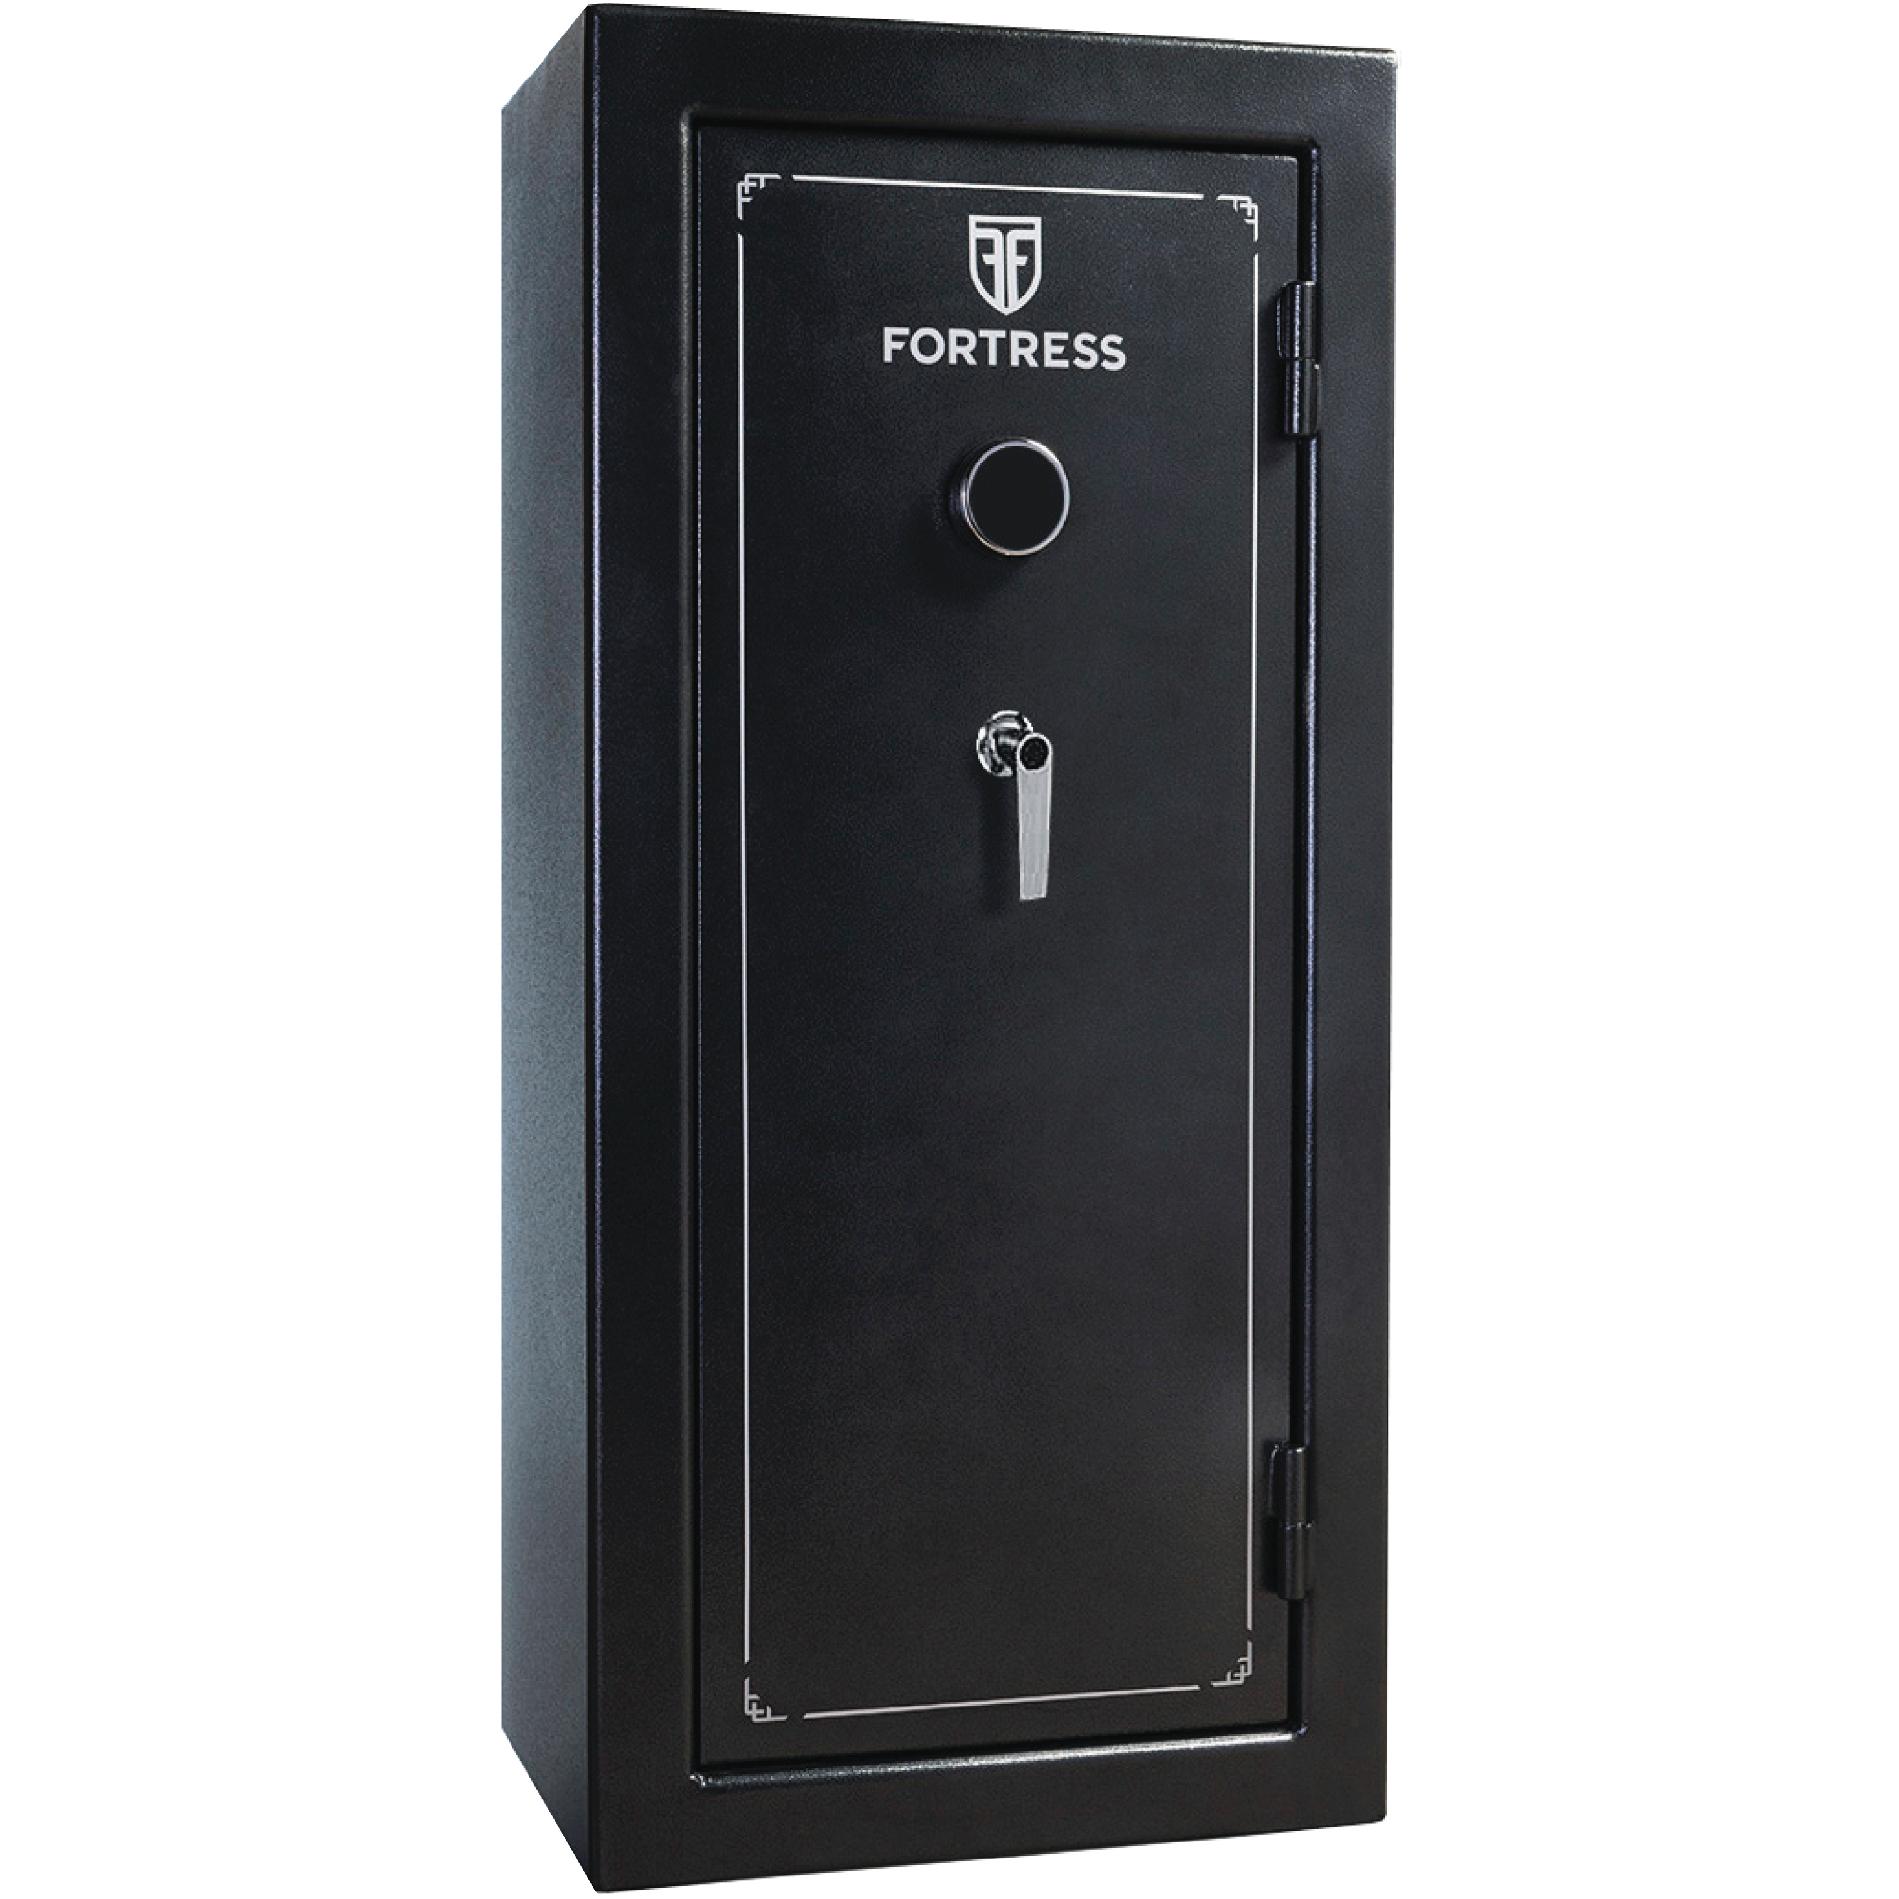 Fortress 14-Gun Fire Safe with Dial Lock